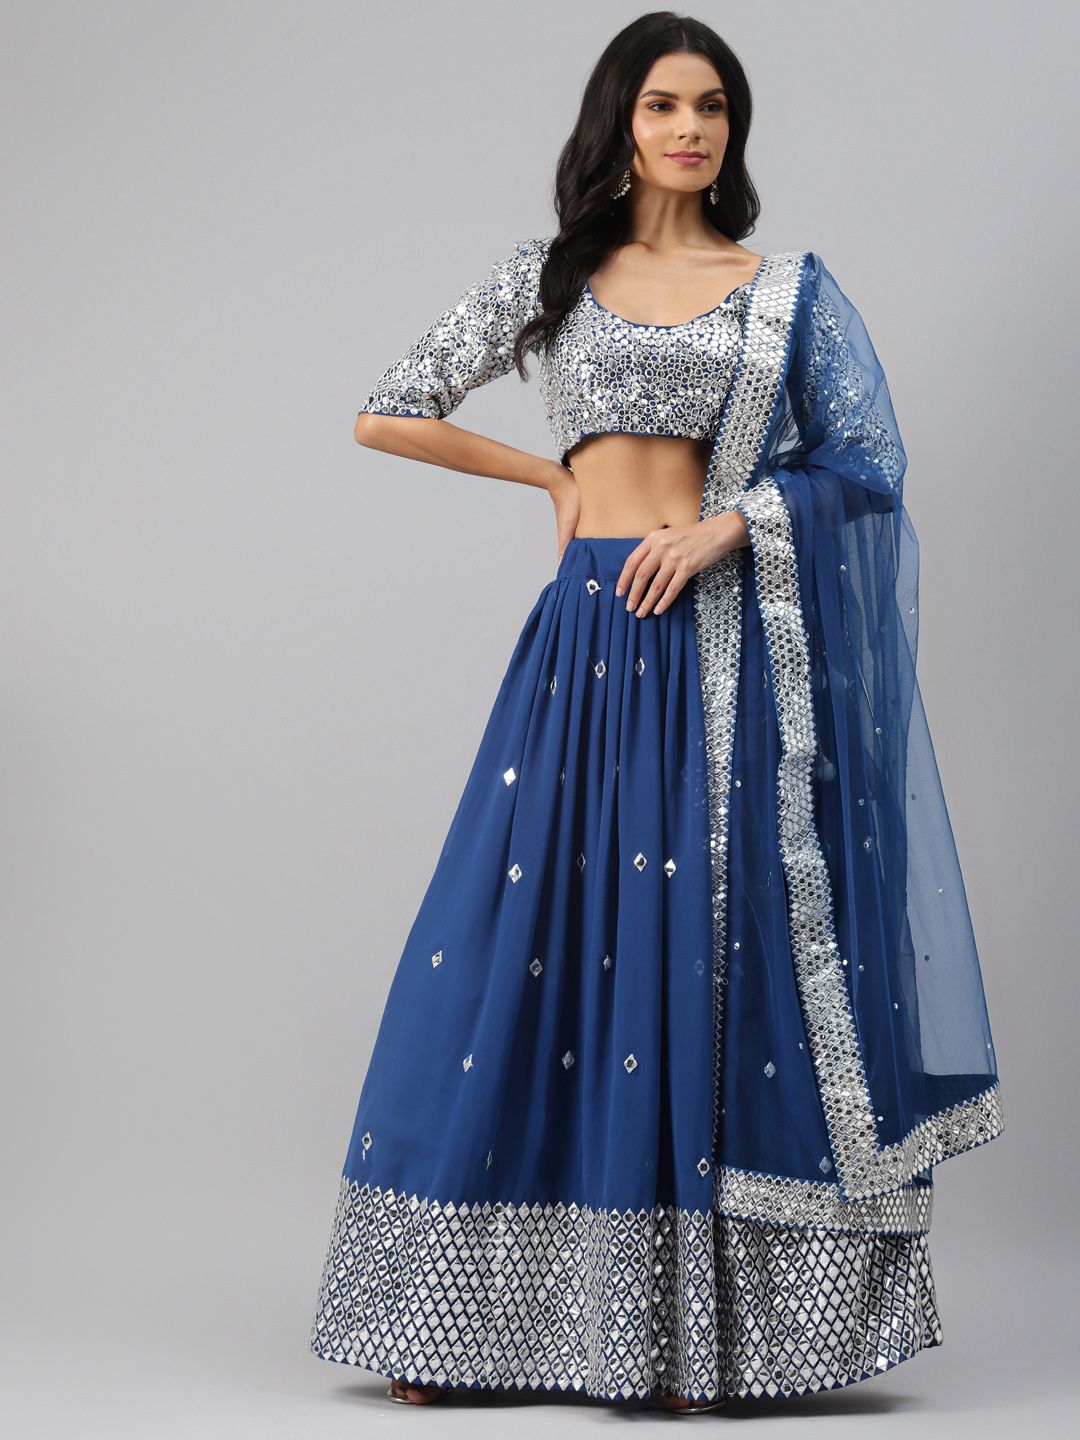 Readiprint Fashions Blue & Silver-Toned Embellished Semi-Stitched Lehenga & Unstitched Blouse with Dupatta Price in India